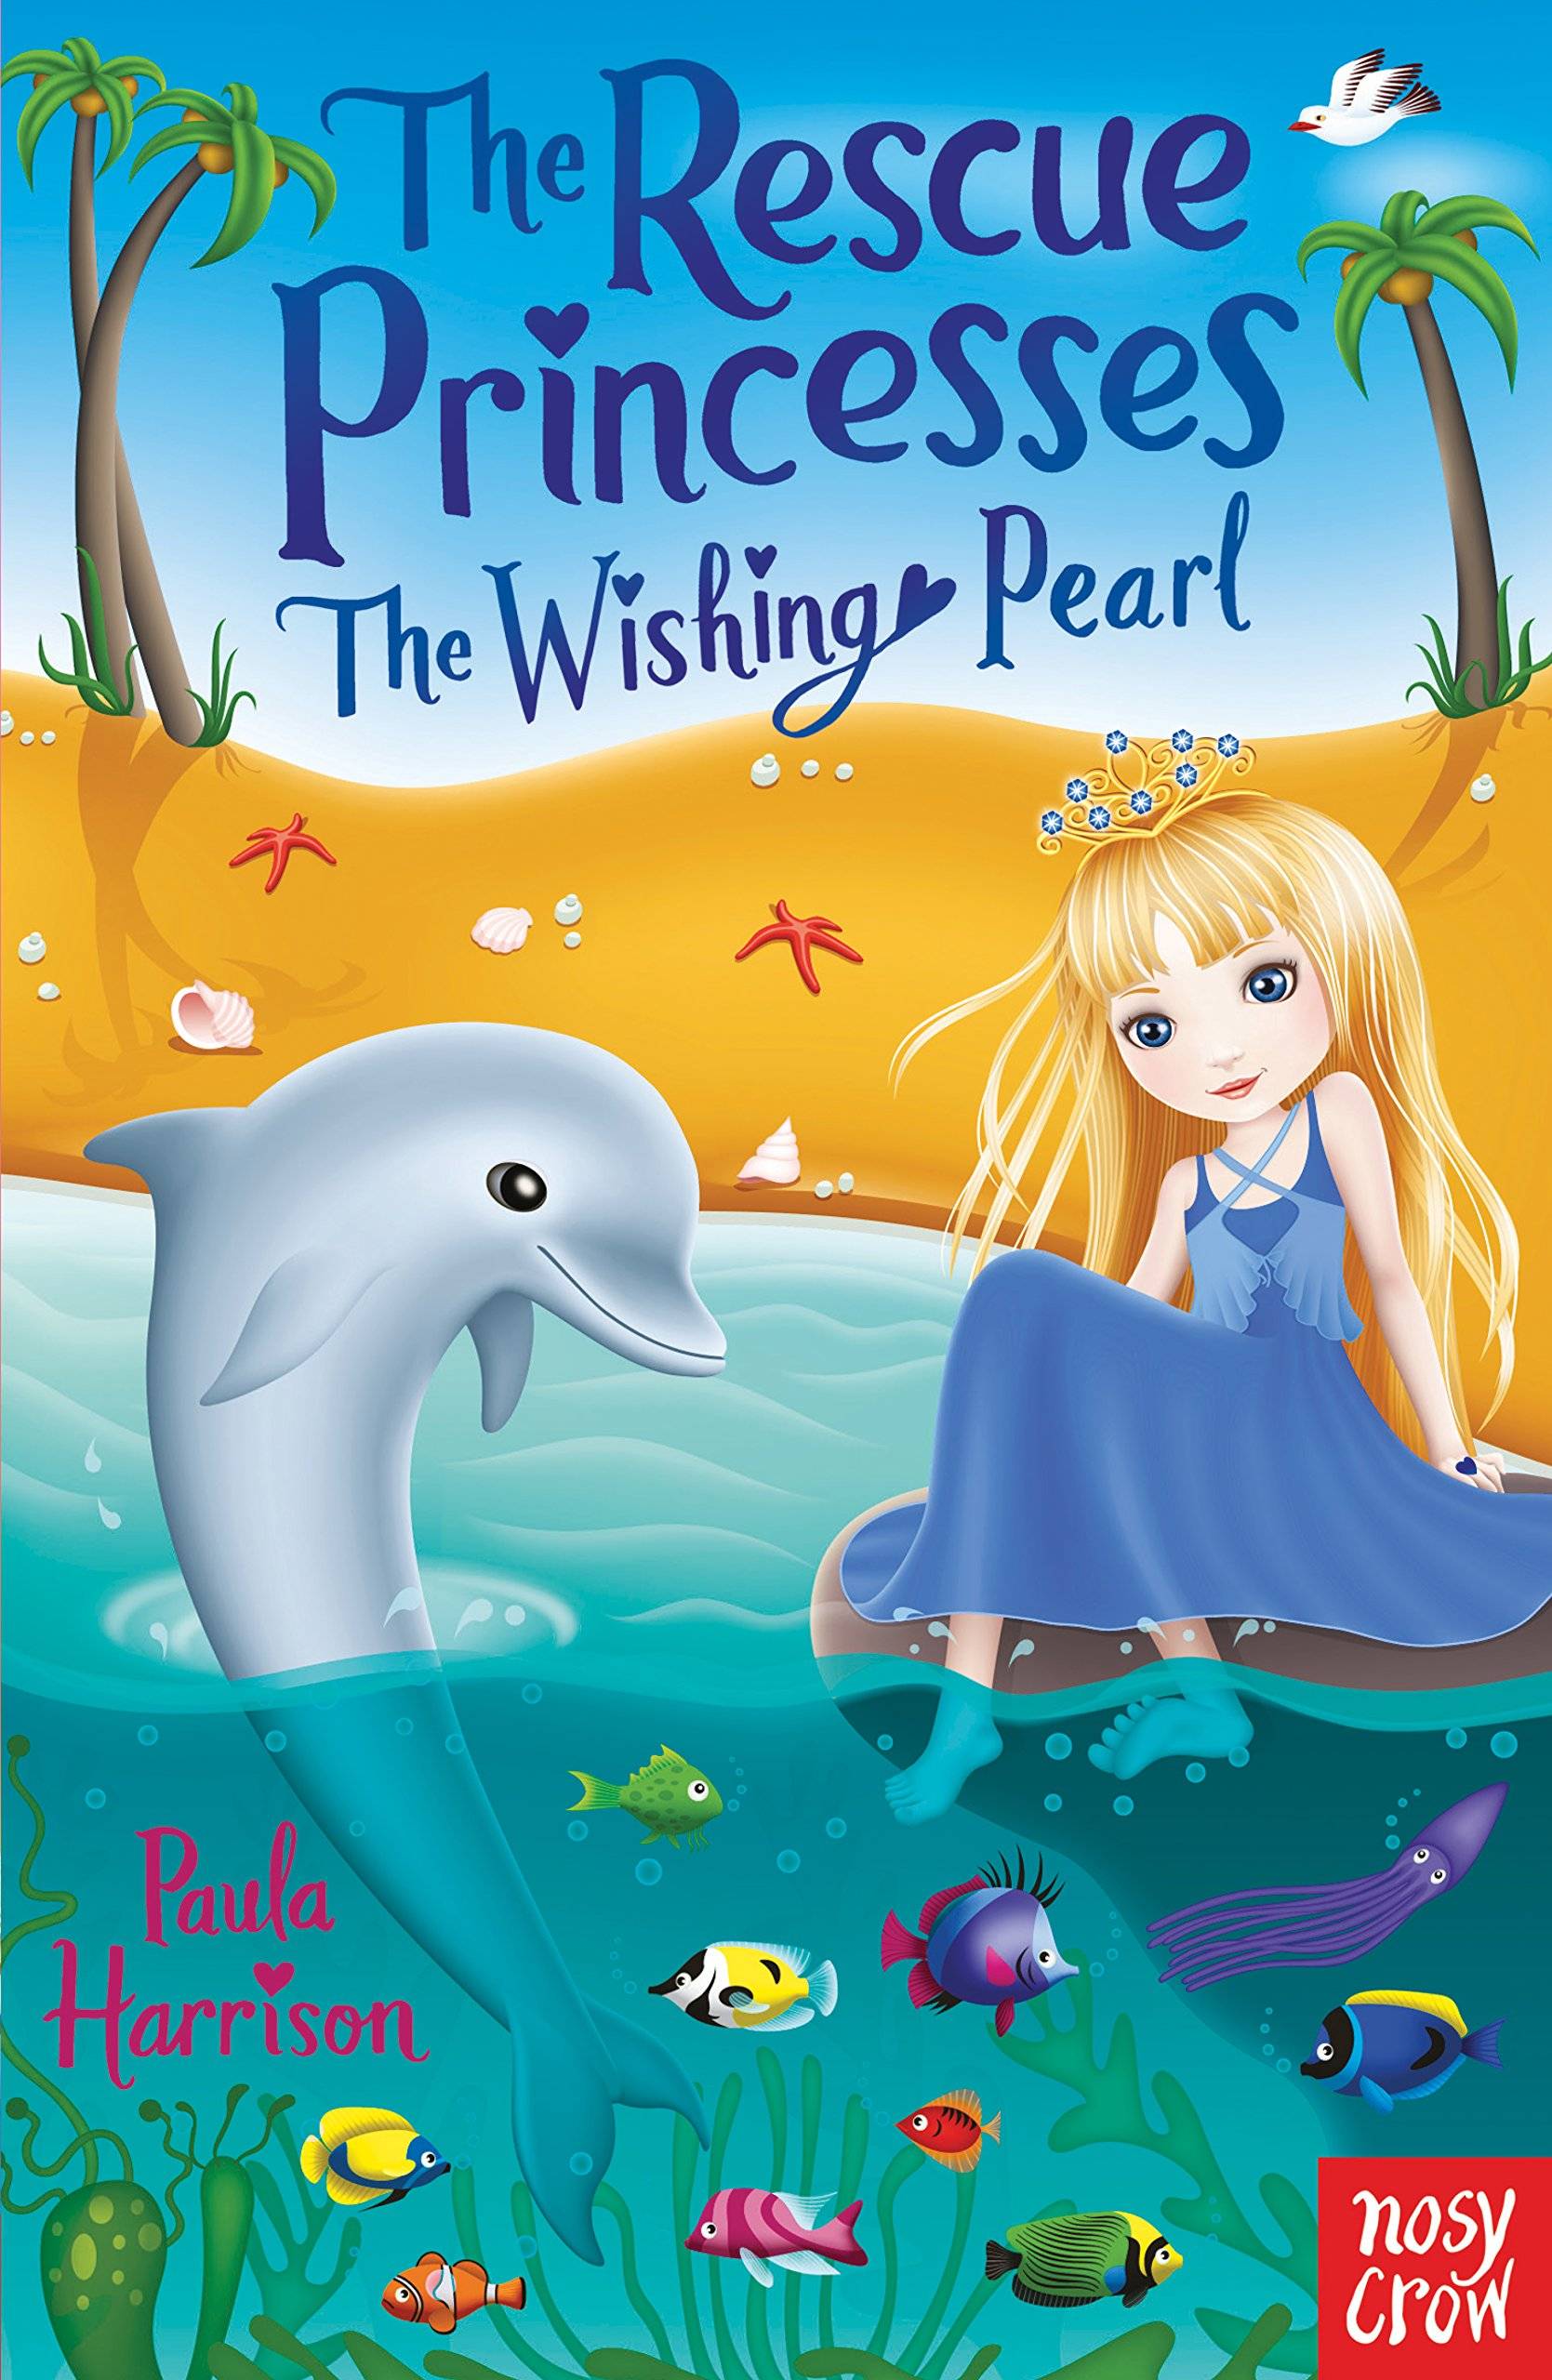 IMG : The Rescue Princess The Wishing Pearl